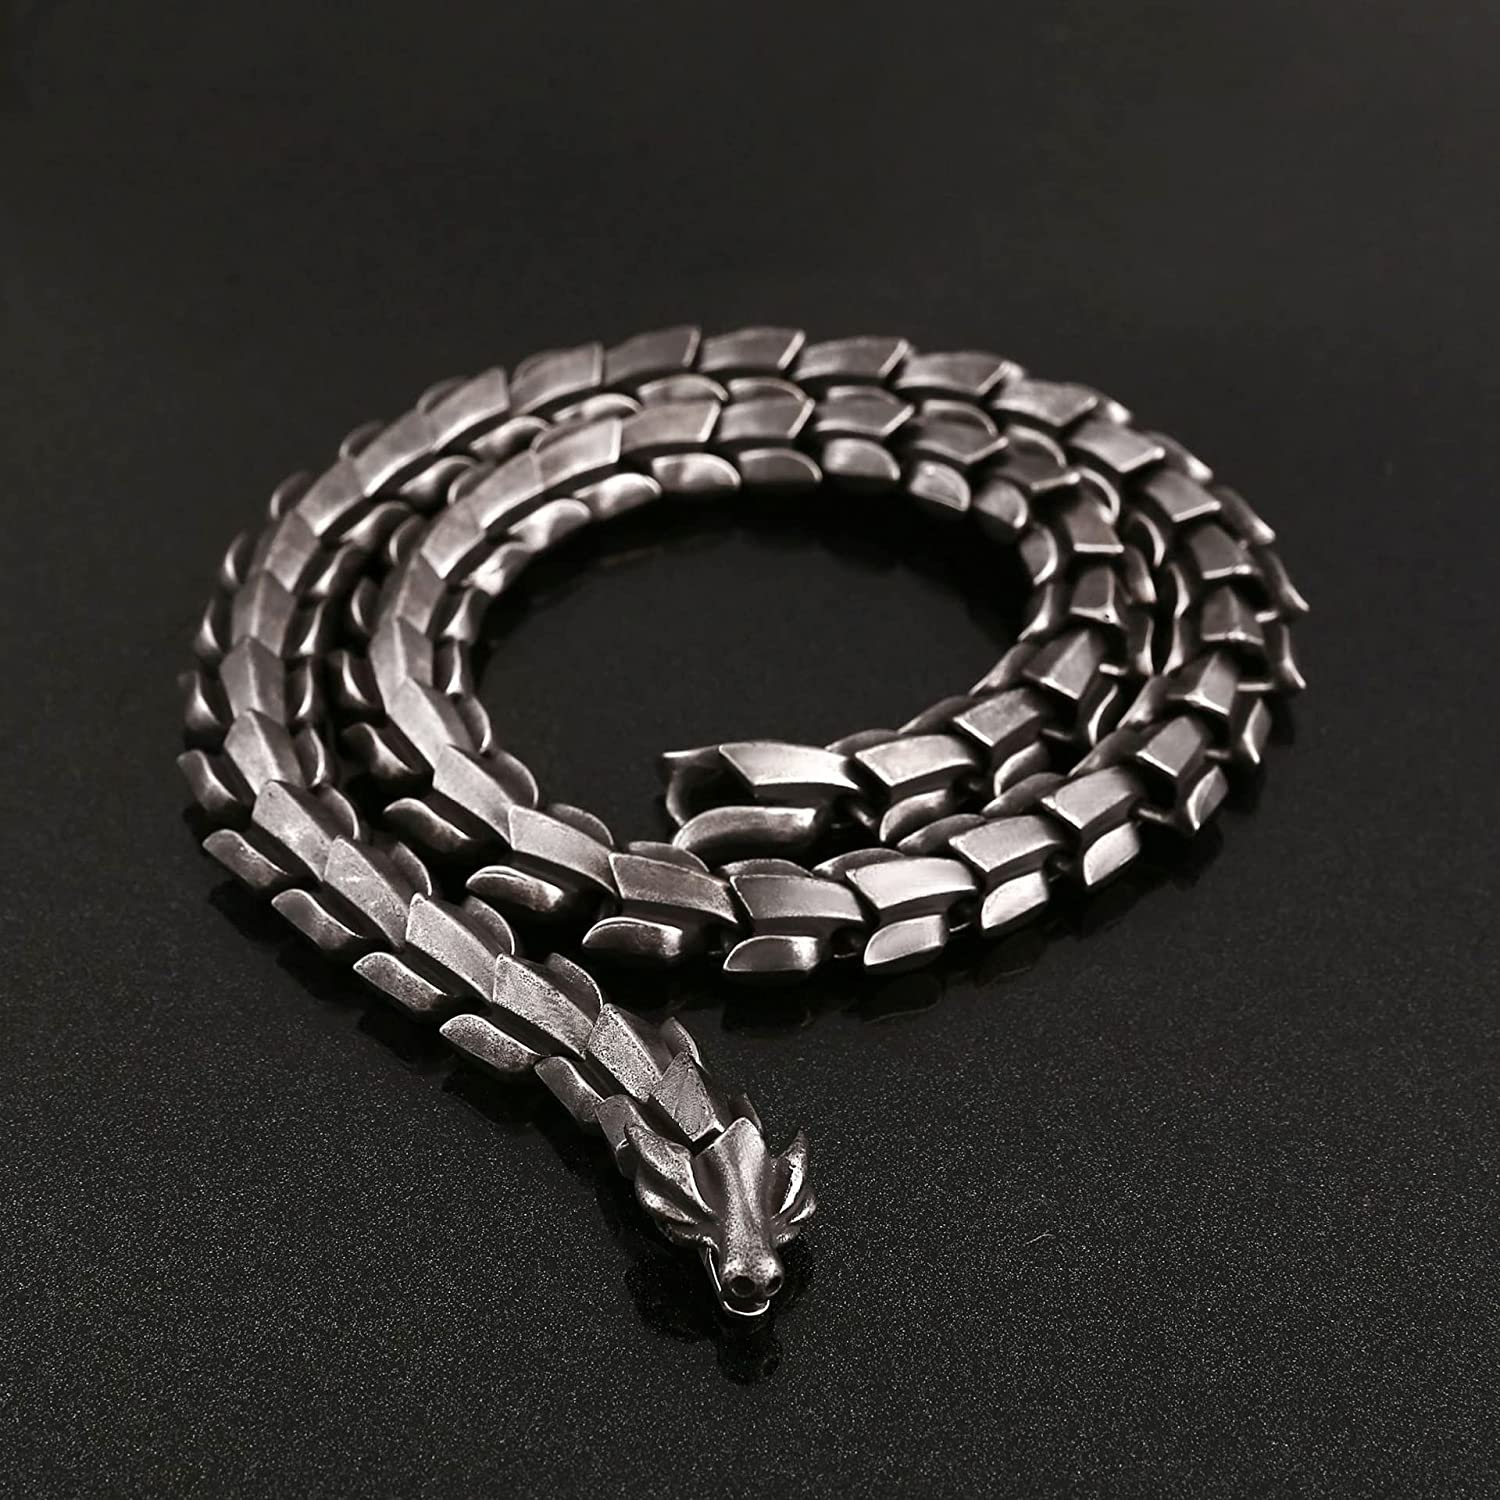 Outdoor Self Defense Protection Tactical Stainless Steel Hand Bracelet Kung  Fu Whip Survival Necklace Chain EDC Outdoor Tool